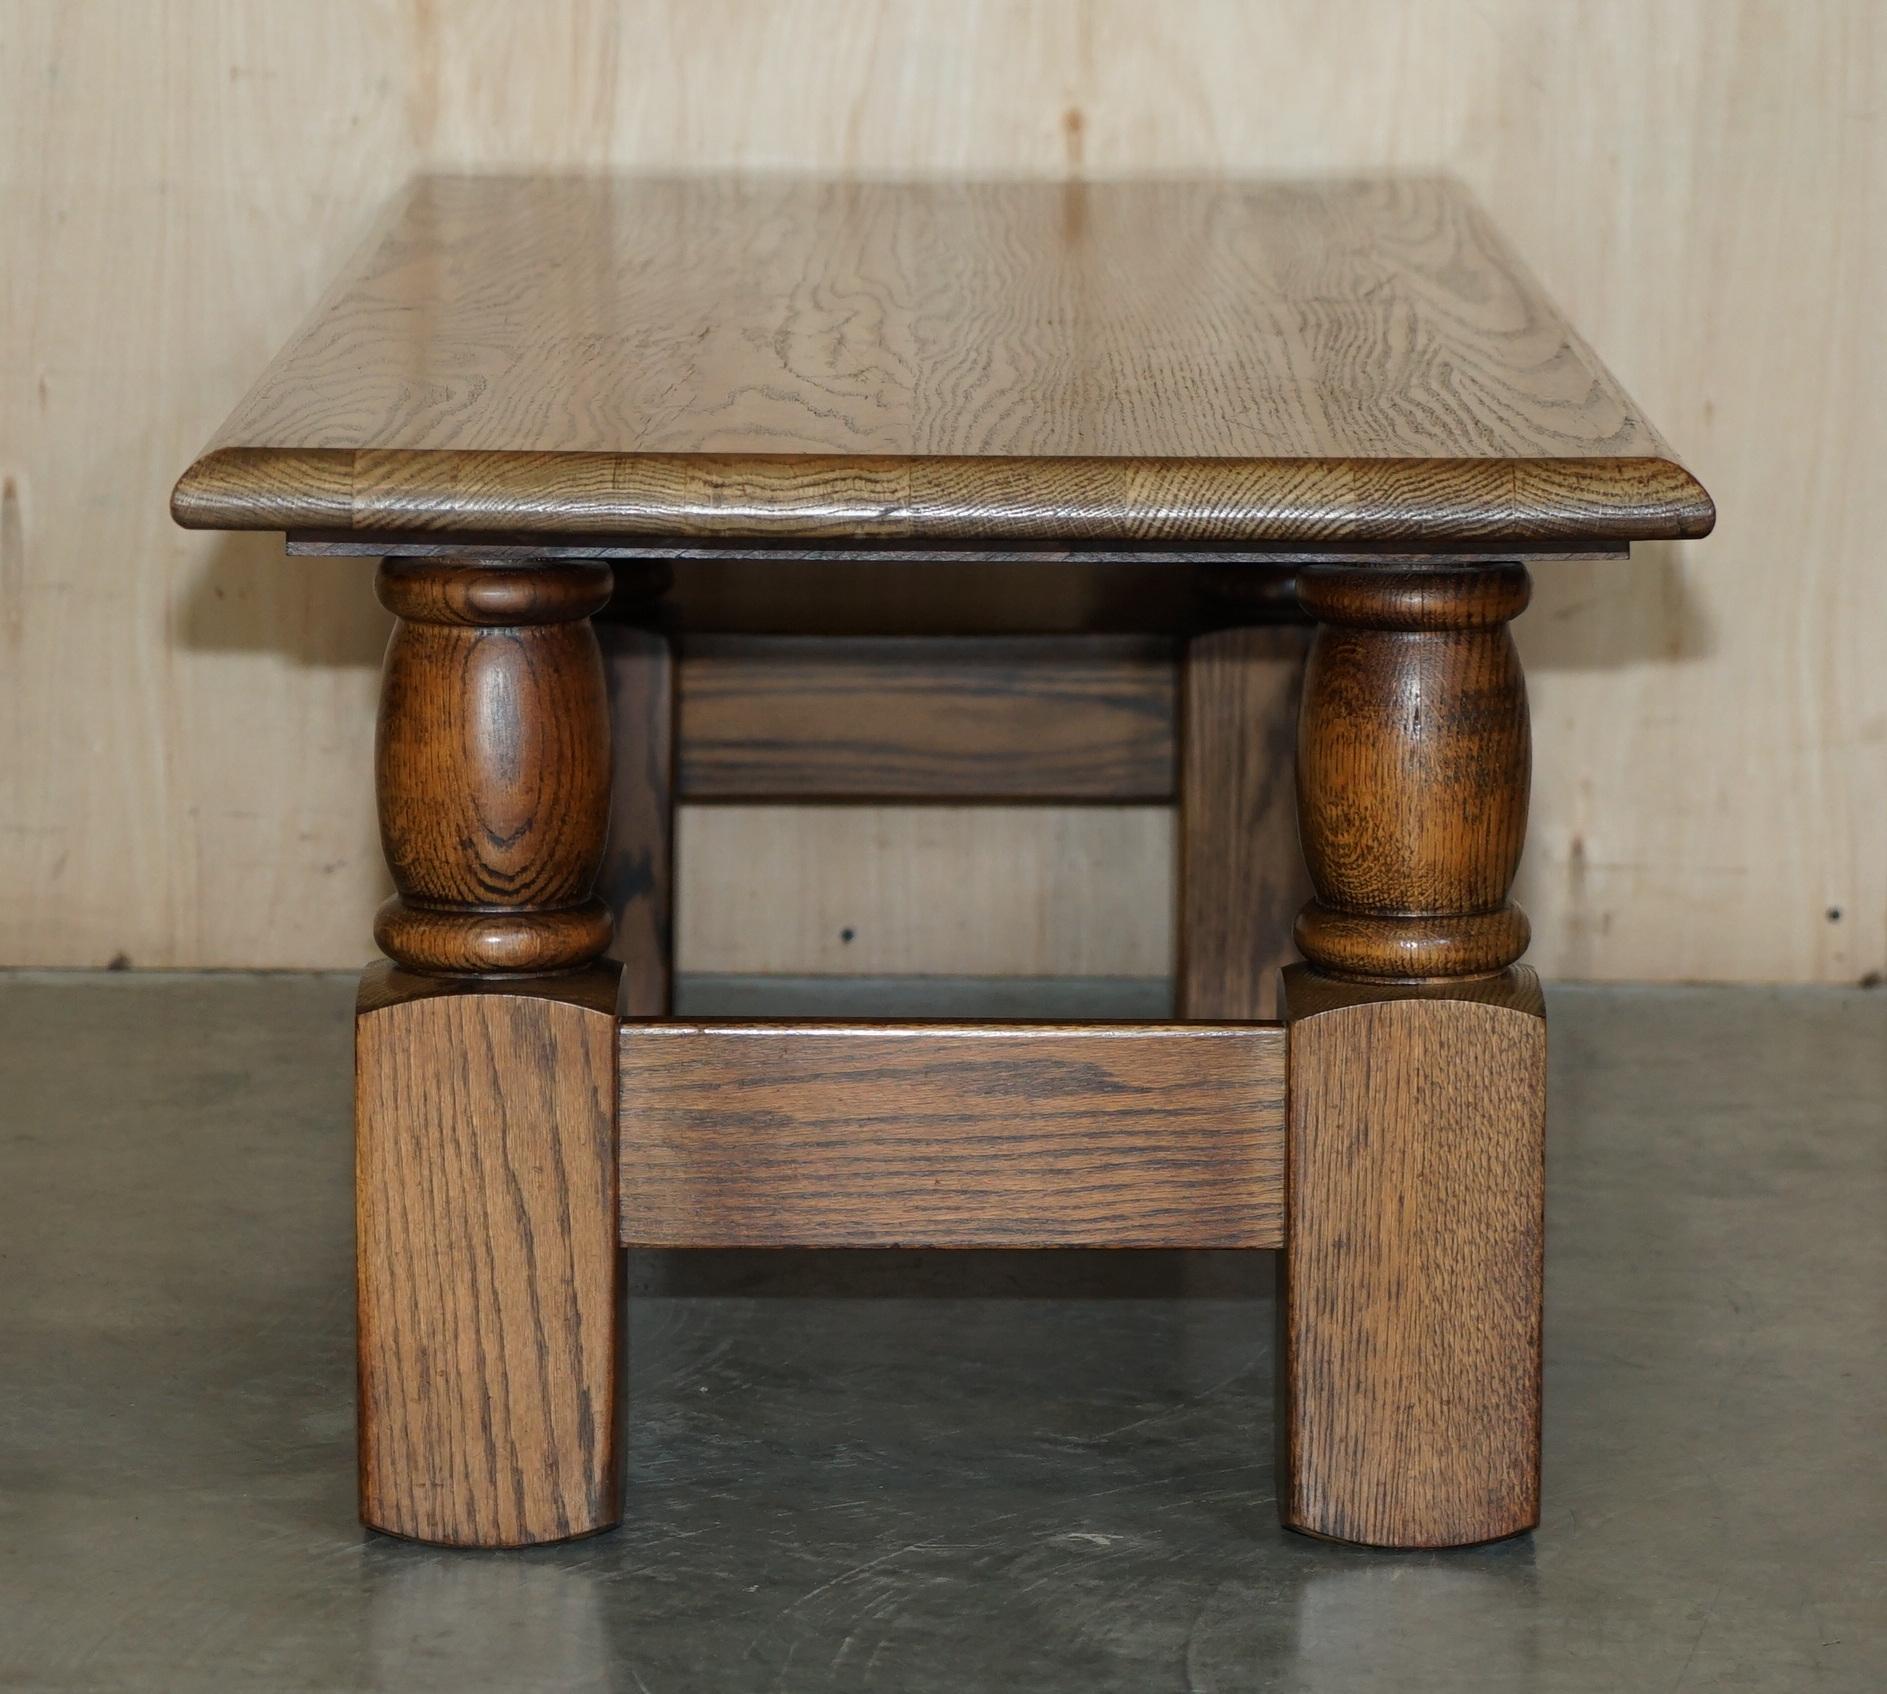 Vintage English Oak Coffee Table Made in the Style of Edwardian Refectory Tables For Sale 10